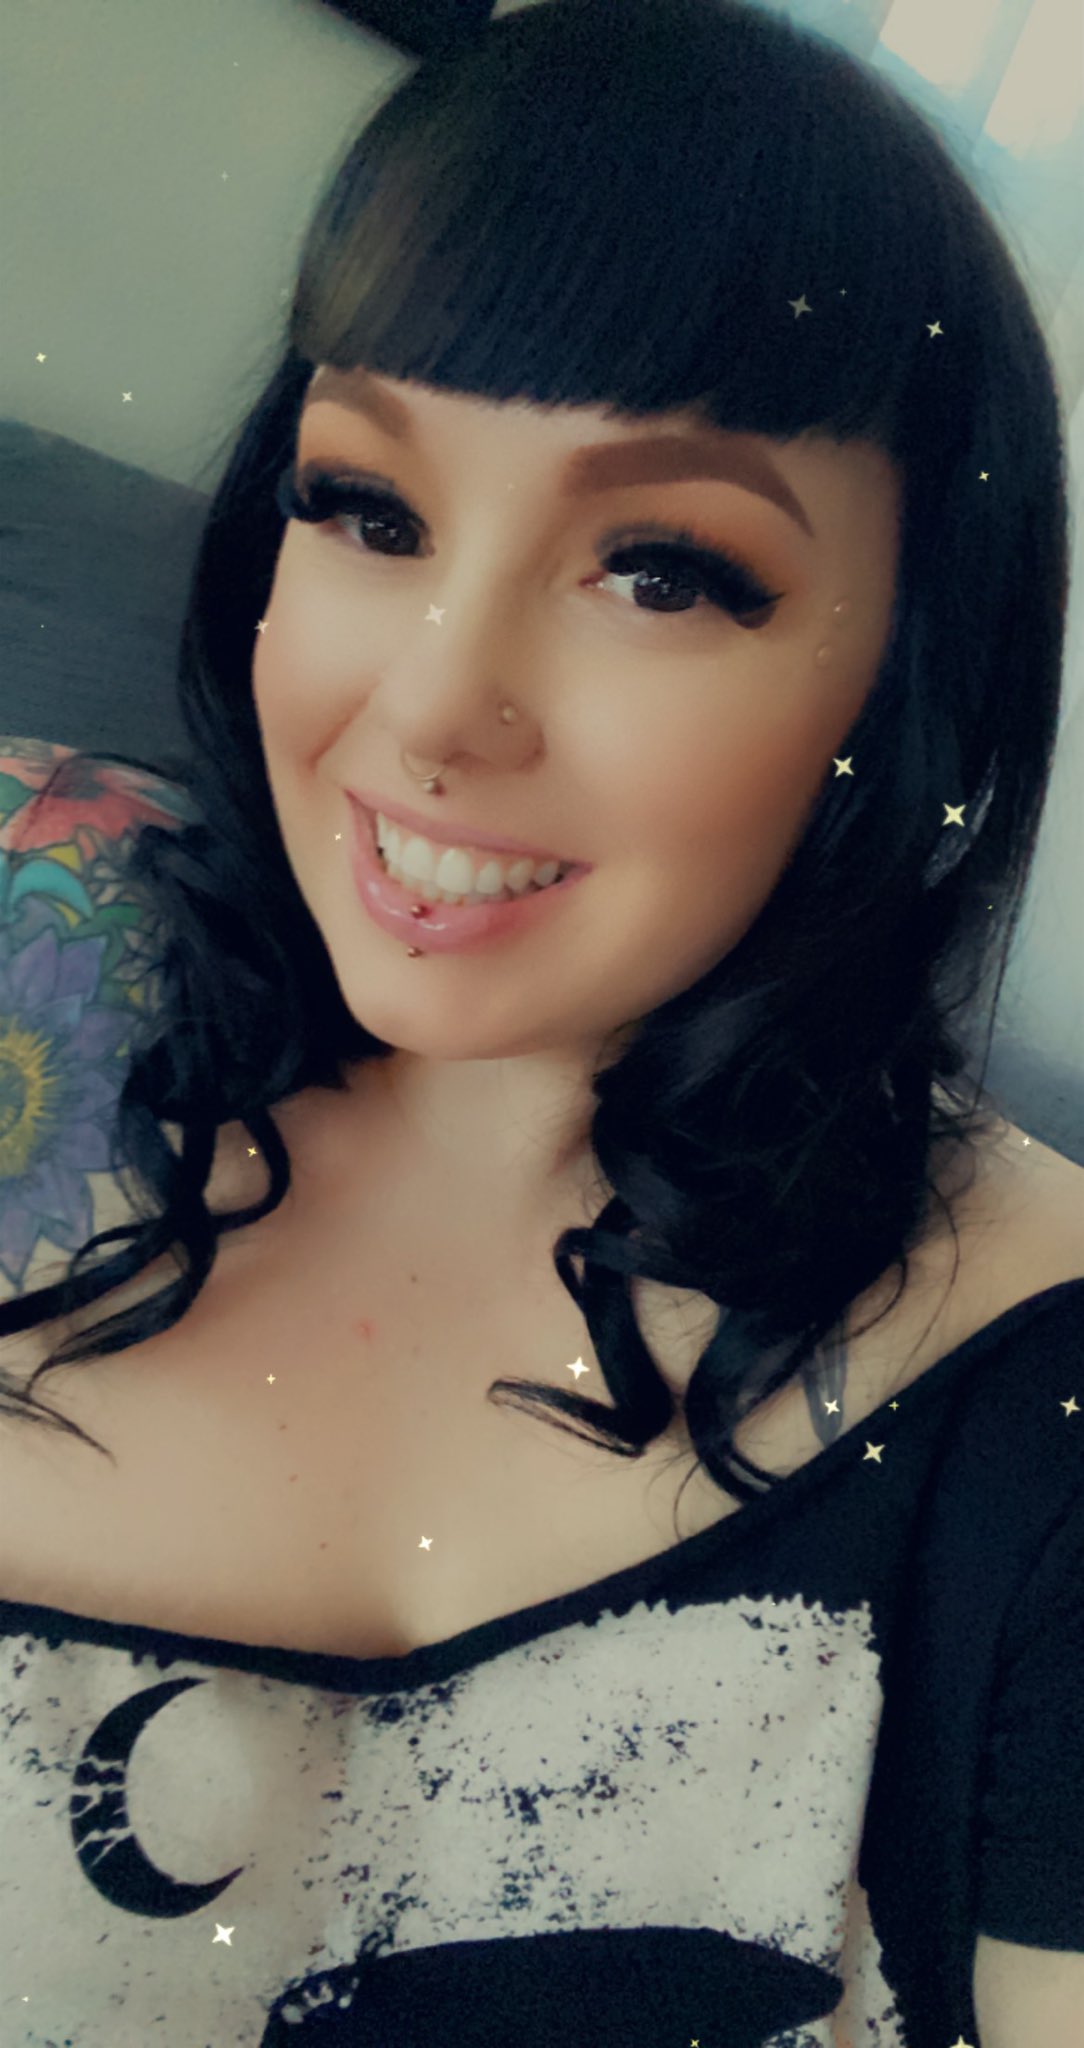 Tw Pornstars Alexxxis Allure Twitter Huge Smile After Today S Photo Shoot Thanks To